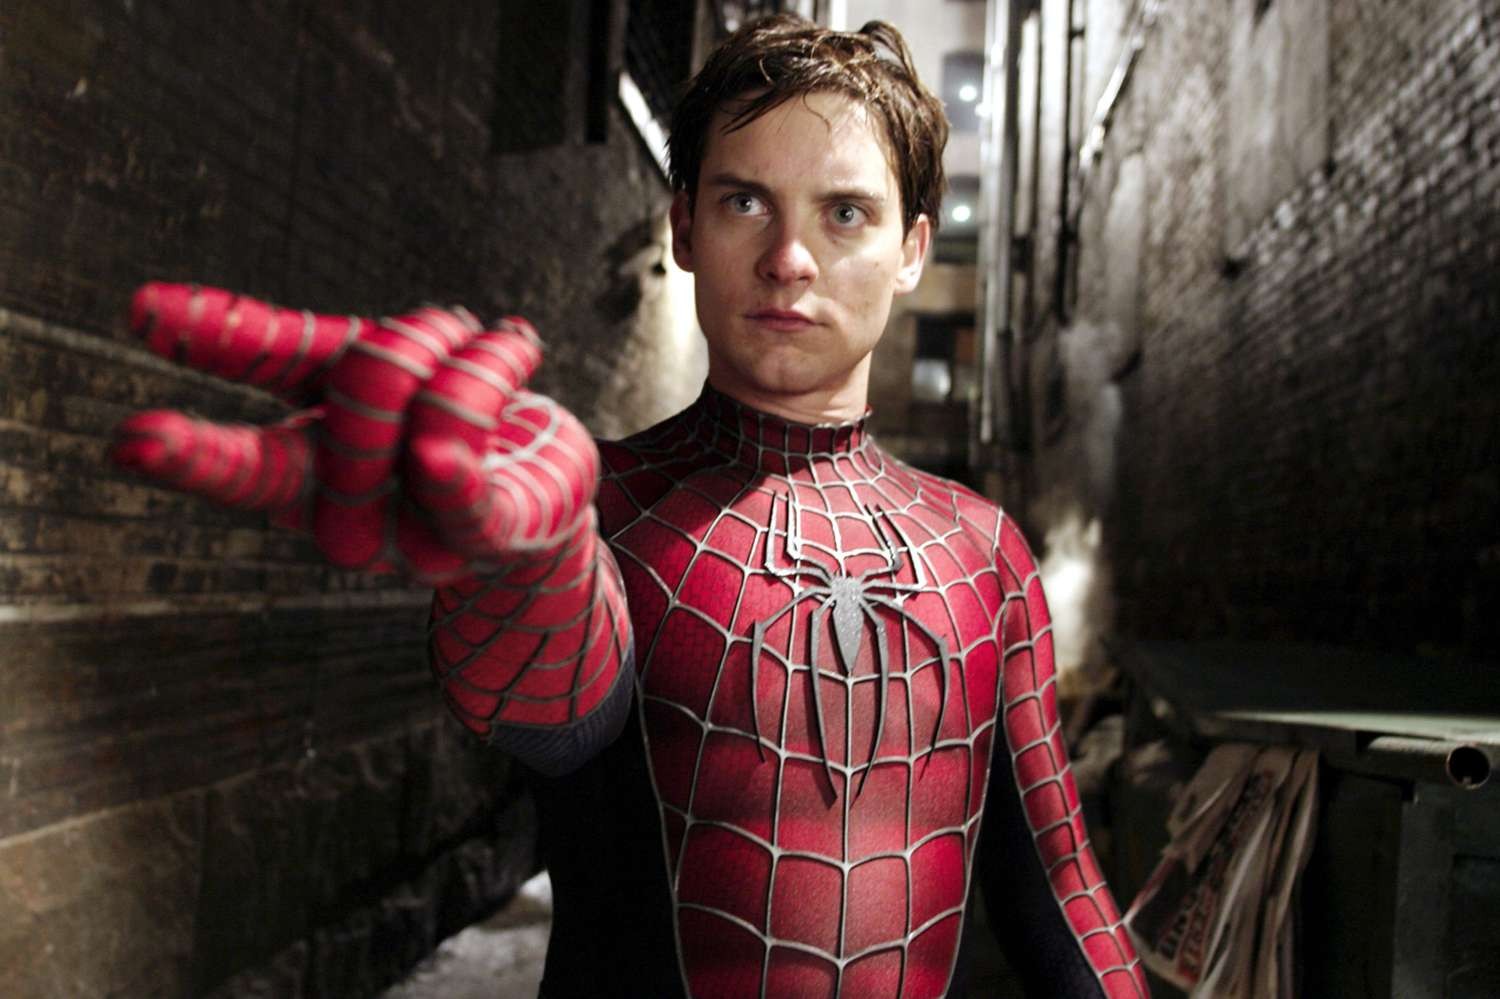 The role of Peter Parker eventually went to Tobey Maguire